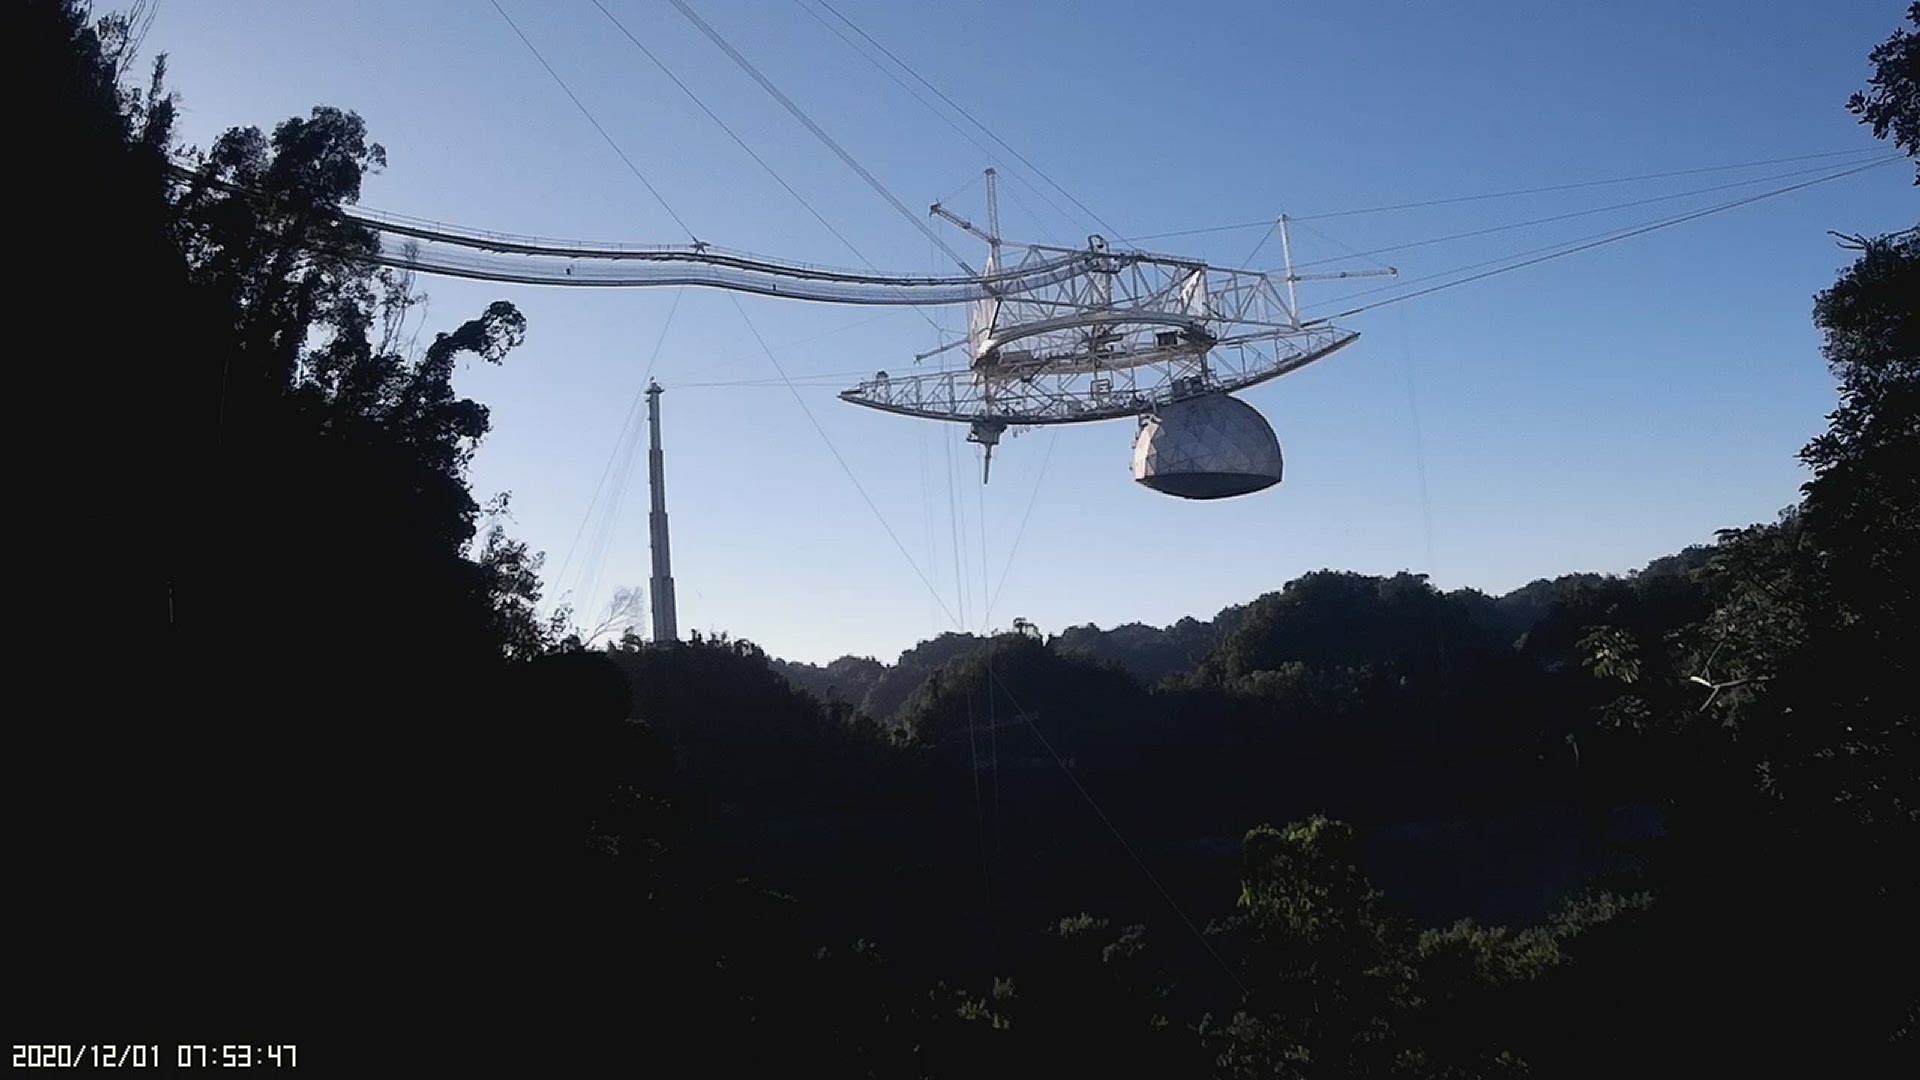 Video taken Dec. 1, 2020, shows the collapse of the radio telescope at the Arecibo Observatory in Puerto Rico.